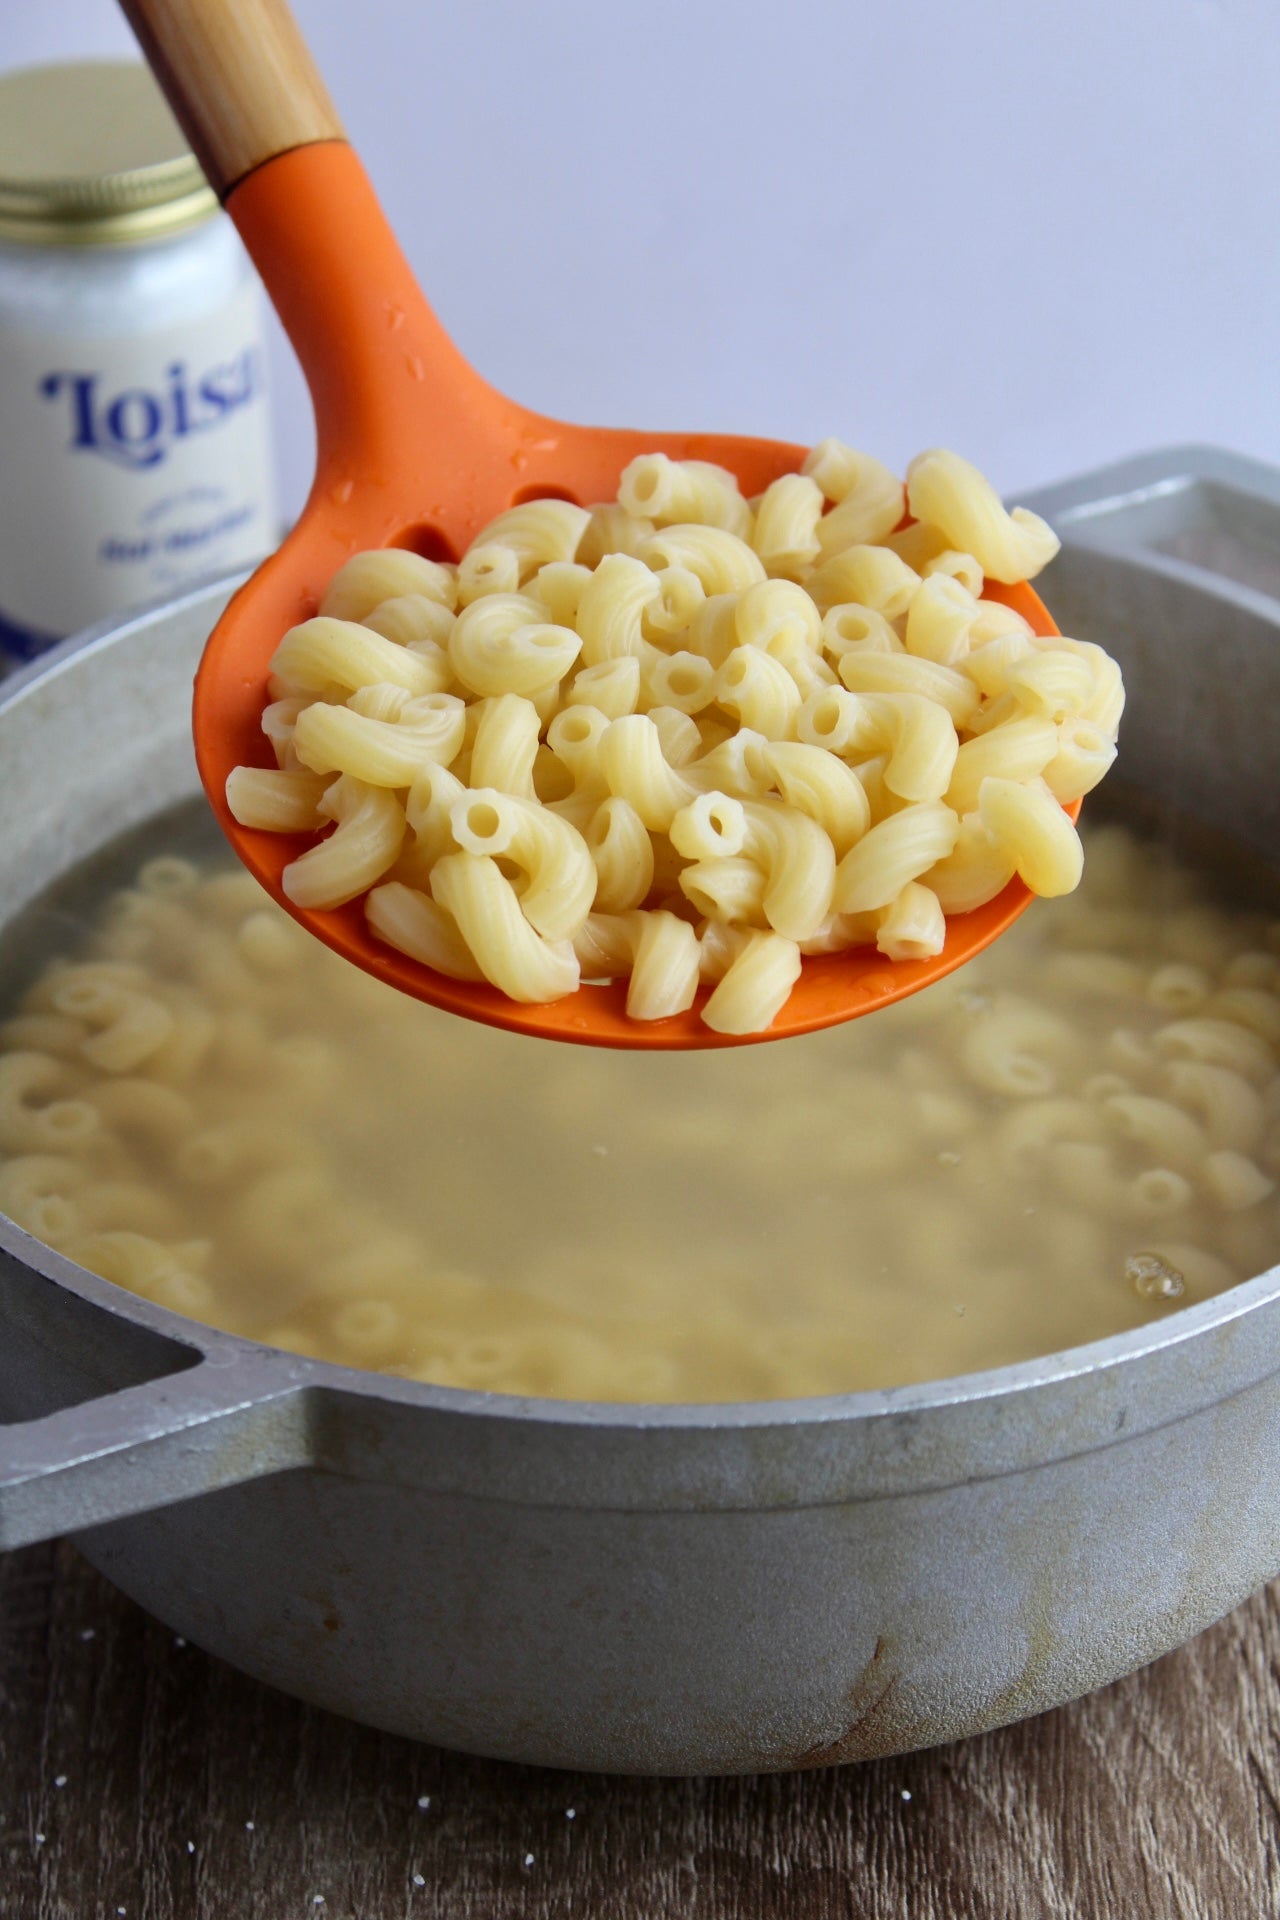 Macaroni getting spooned out of pot with skimmer